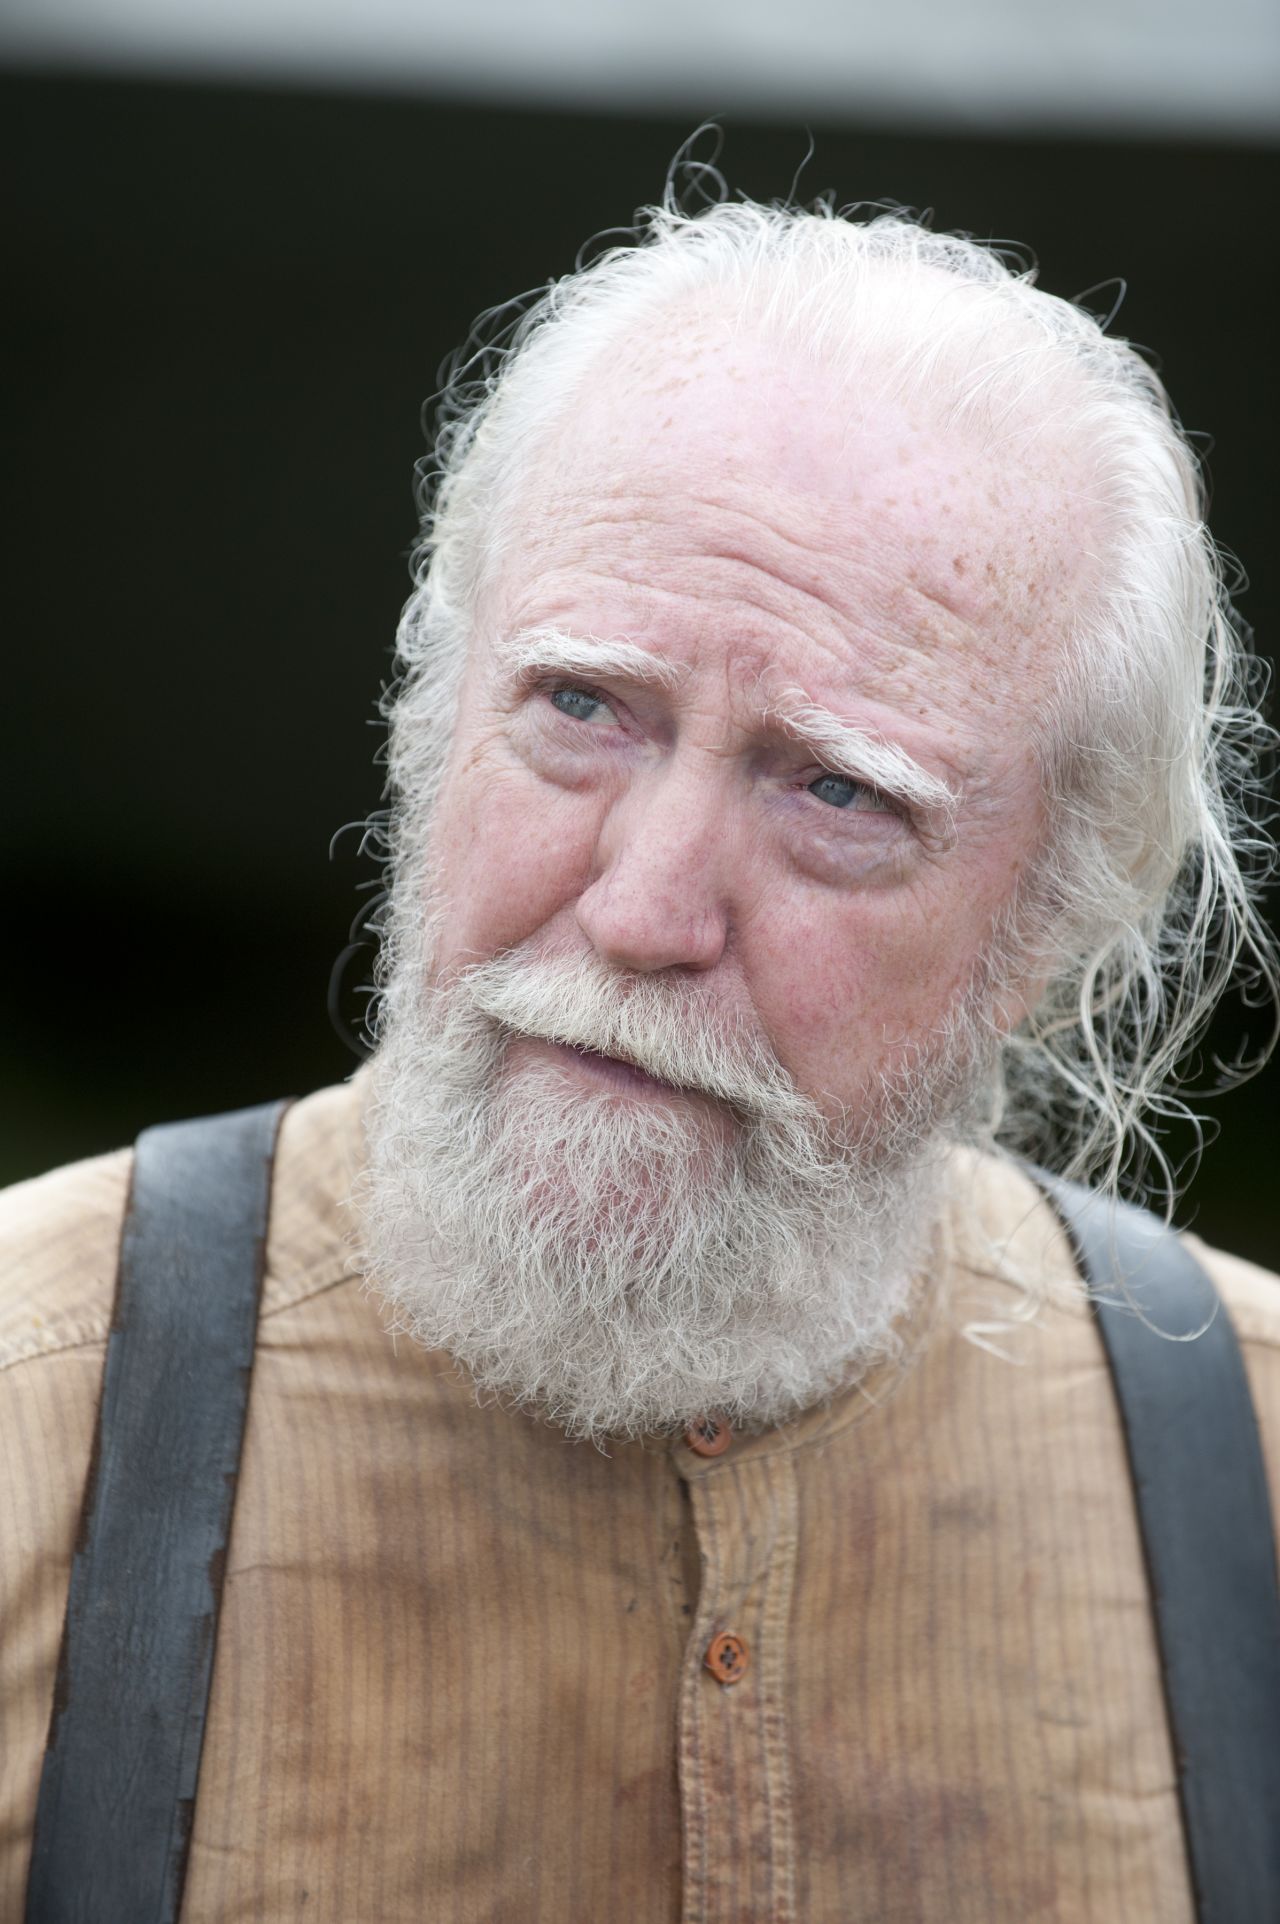 The death of the wise doctor, Hershel, during "The Walking Dead's" fourth season broke some hearts. 